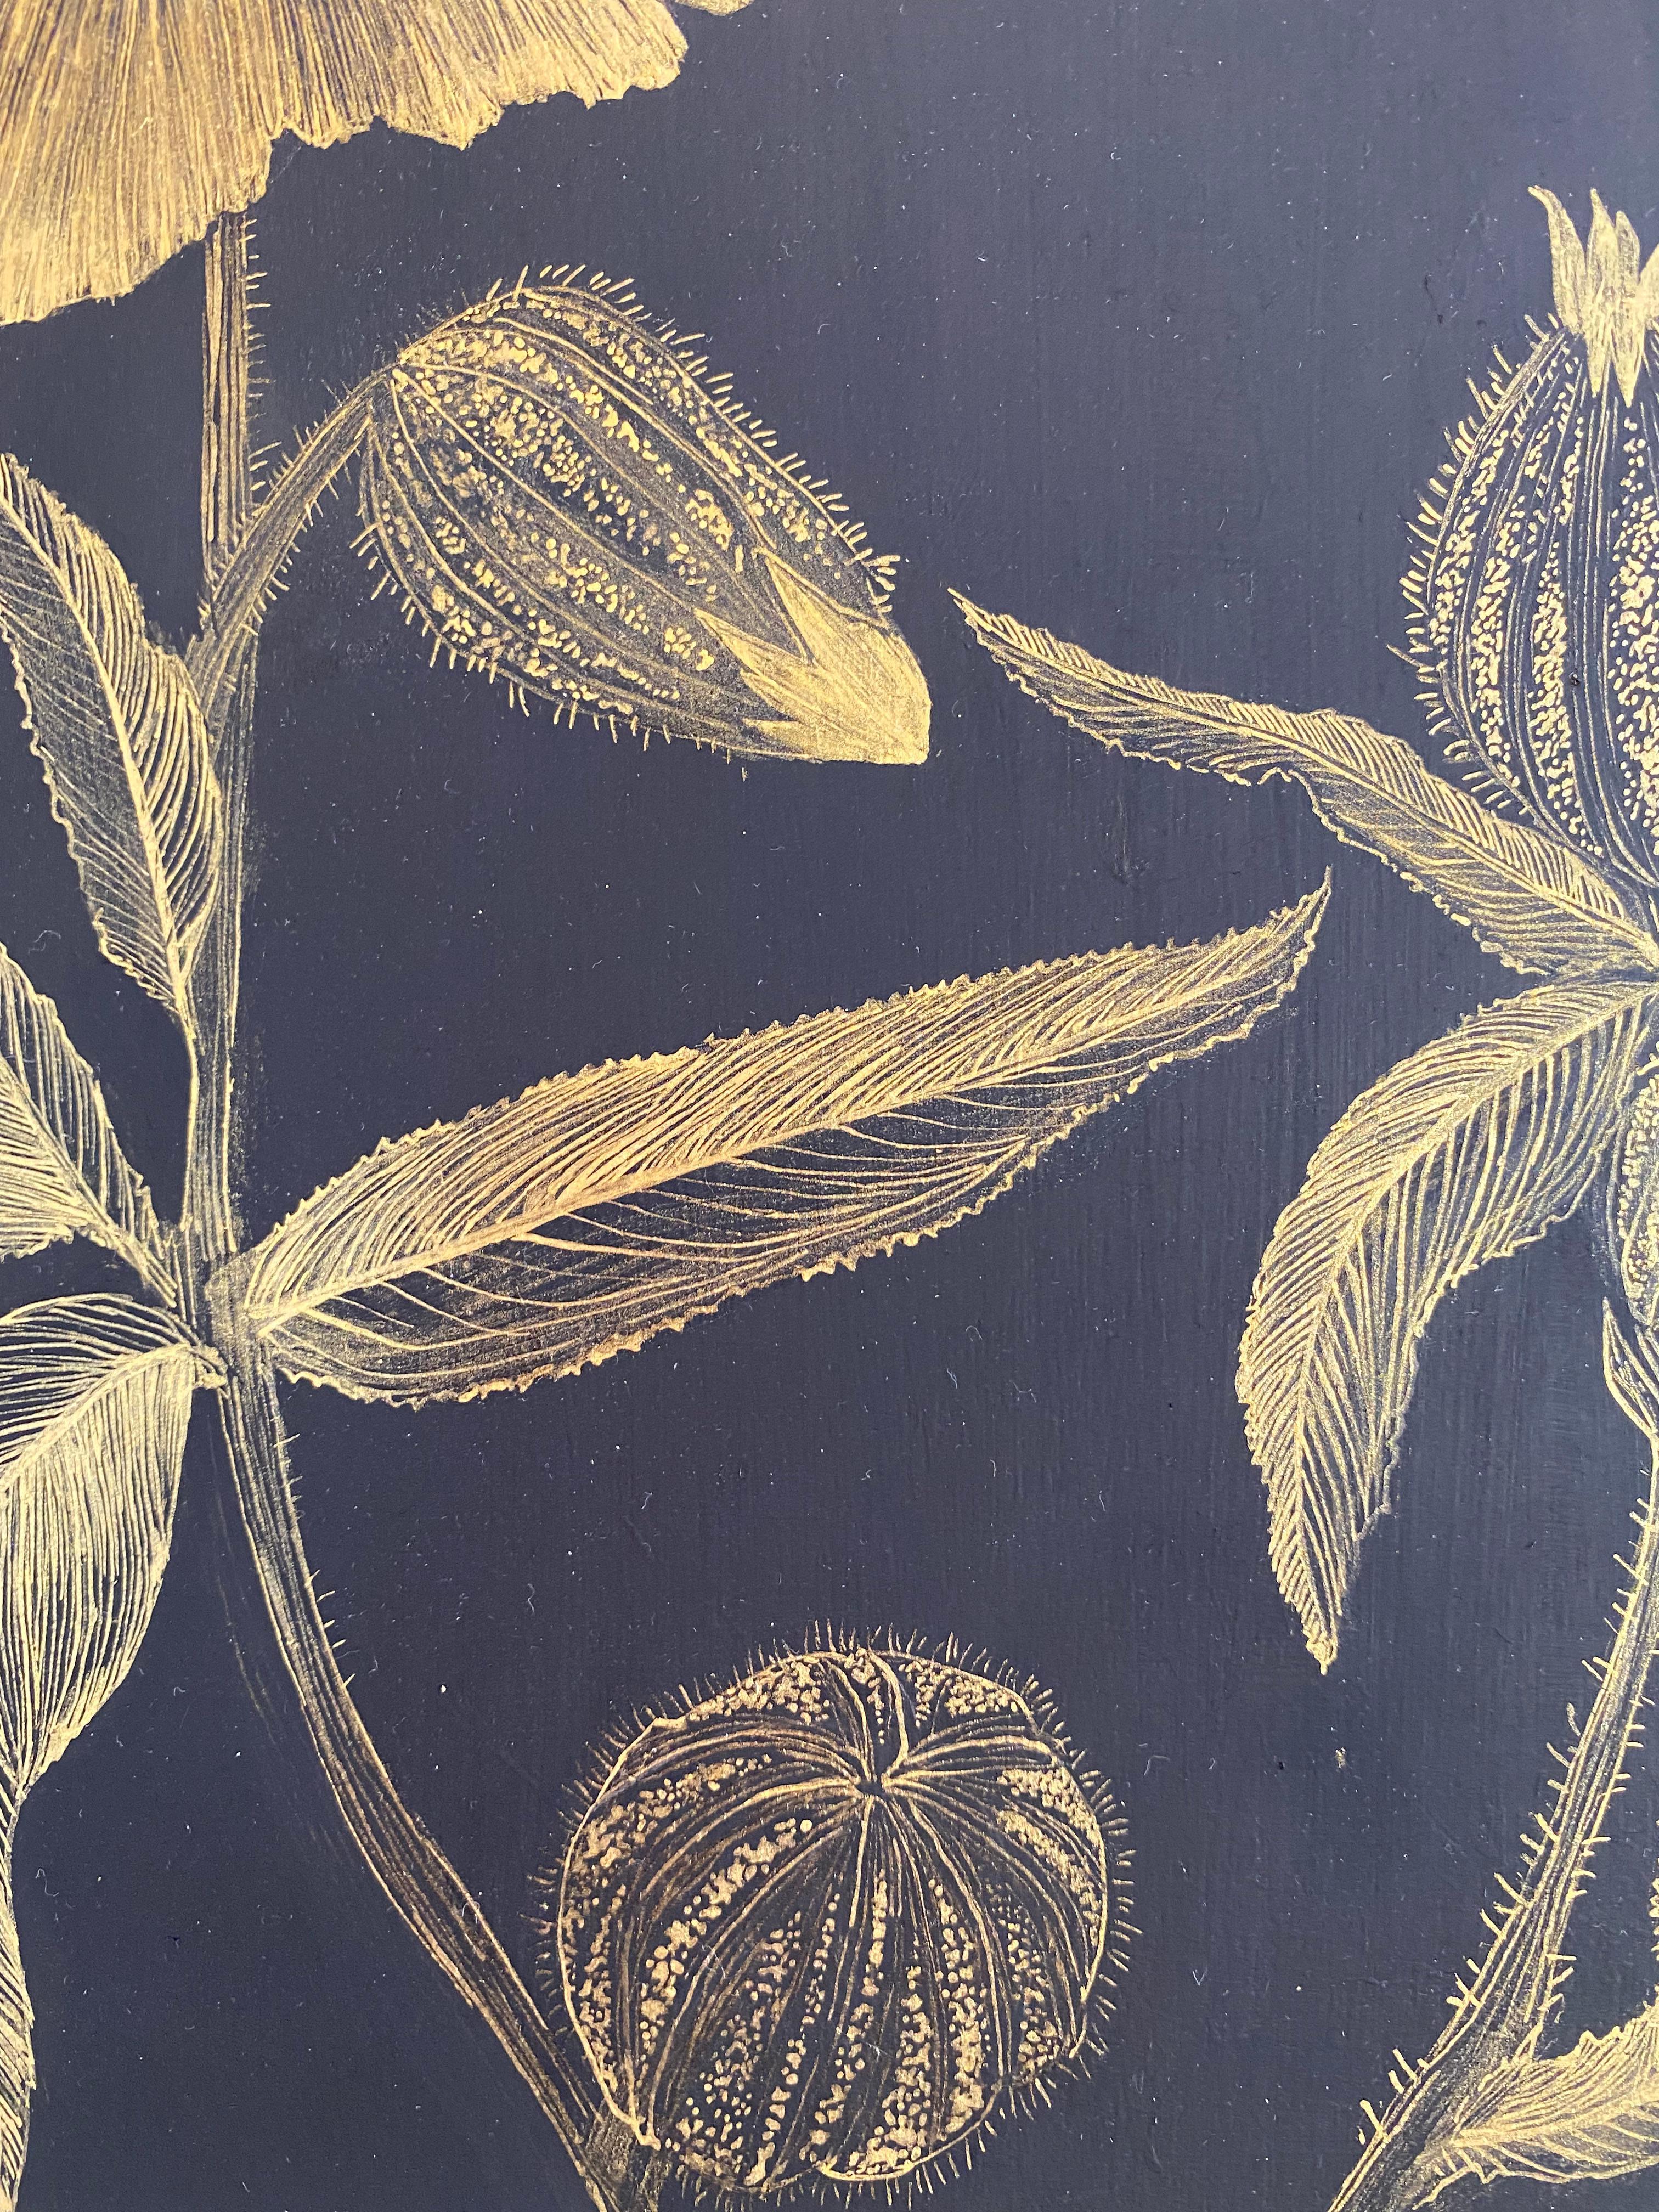 Marshmallow Two, Gold Flowers, Leaves Stem, Metallic Botanical Painting on Black For Sale 8